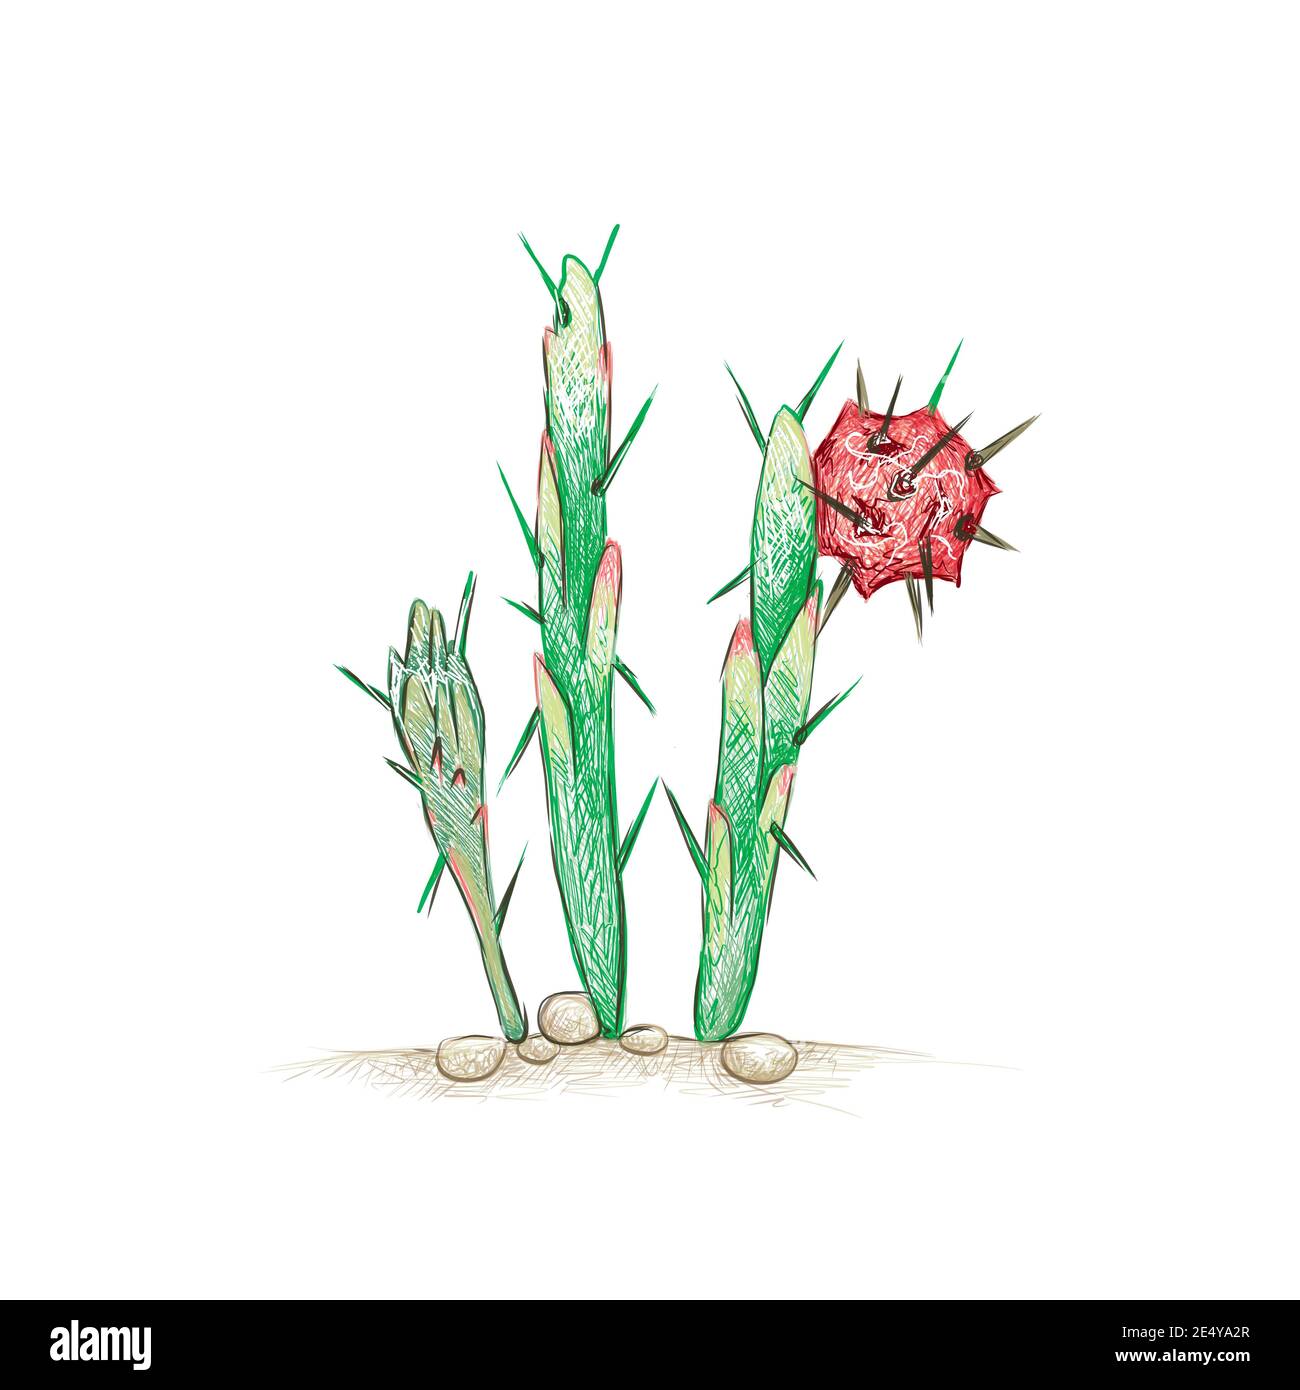 Illustration Hand Drawn Sketch of Harrisia, Applecactus, Moonlight Cactus with Red Fruits for Garden Decoration. Stock Photo